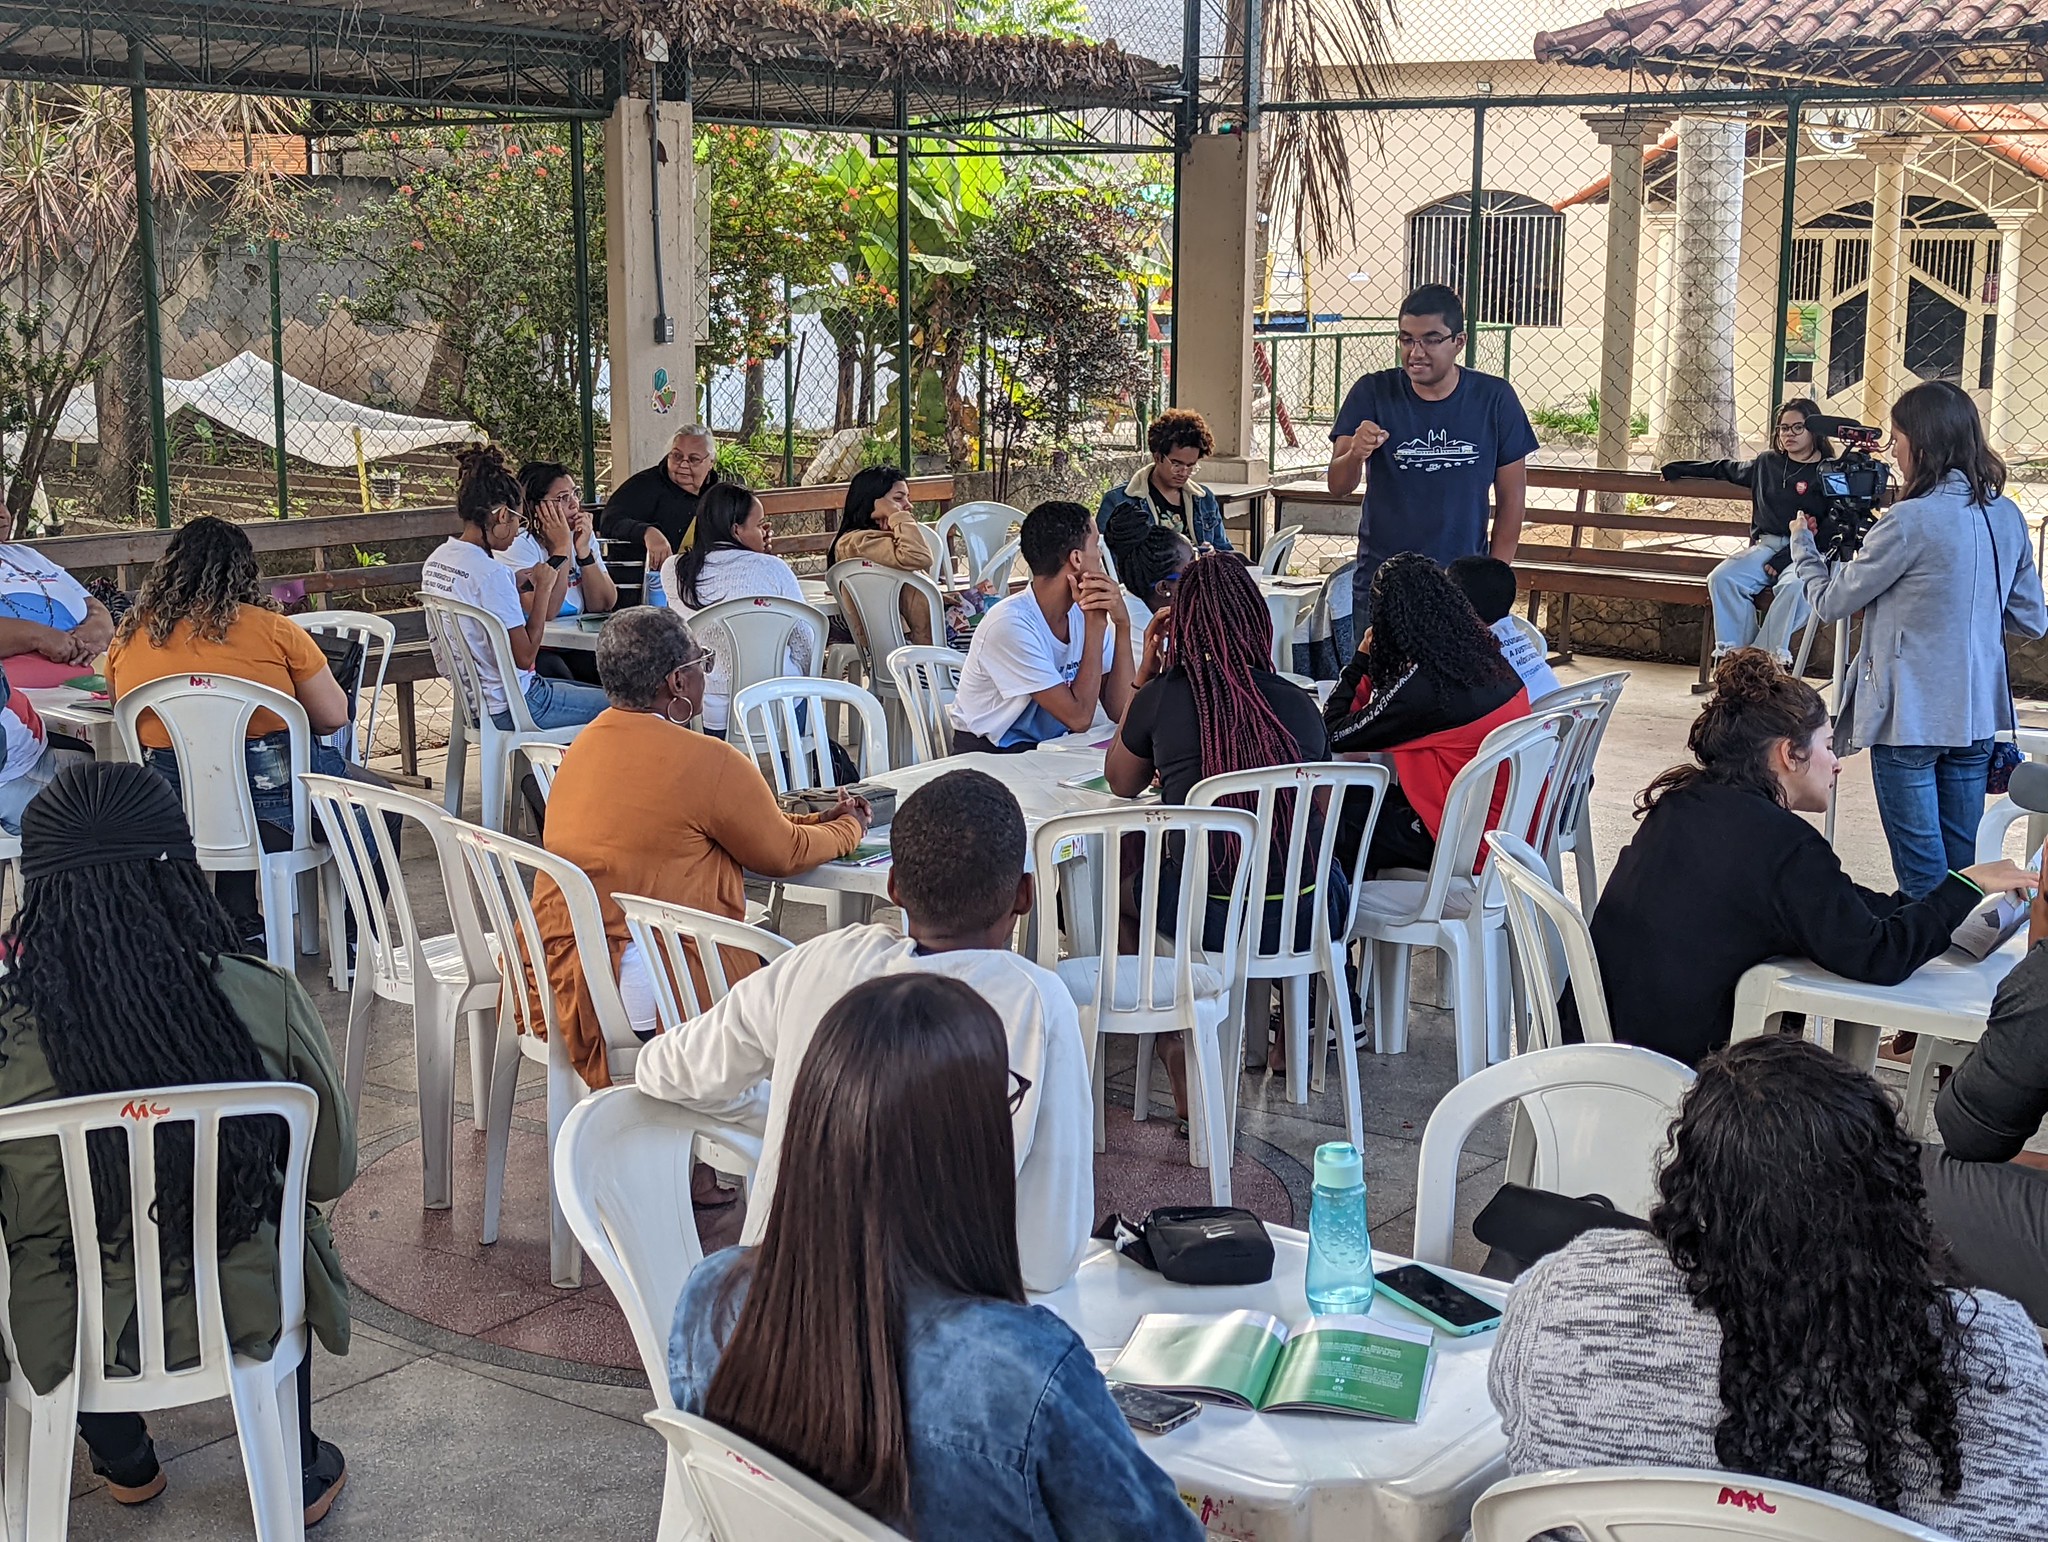 Influencing Policy Module took place in Jacutinga, Mesquita-Baixada Fluminense. Led by Henrique Silveira from Casa Fluminense and Vinícius Lopes from DataLabe. Photo: Luiza de Andrade